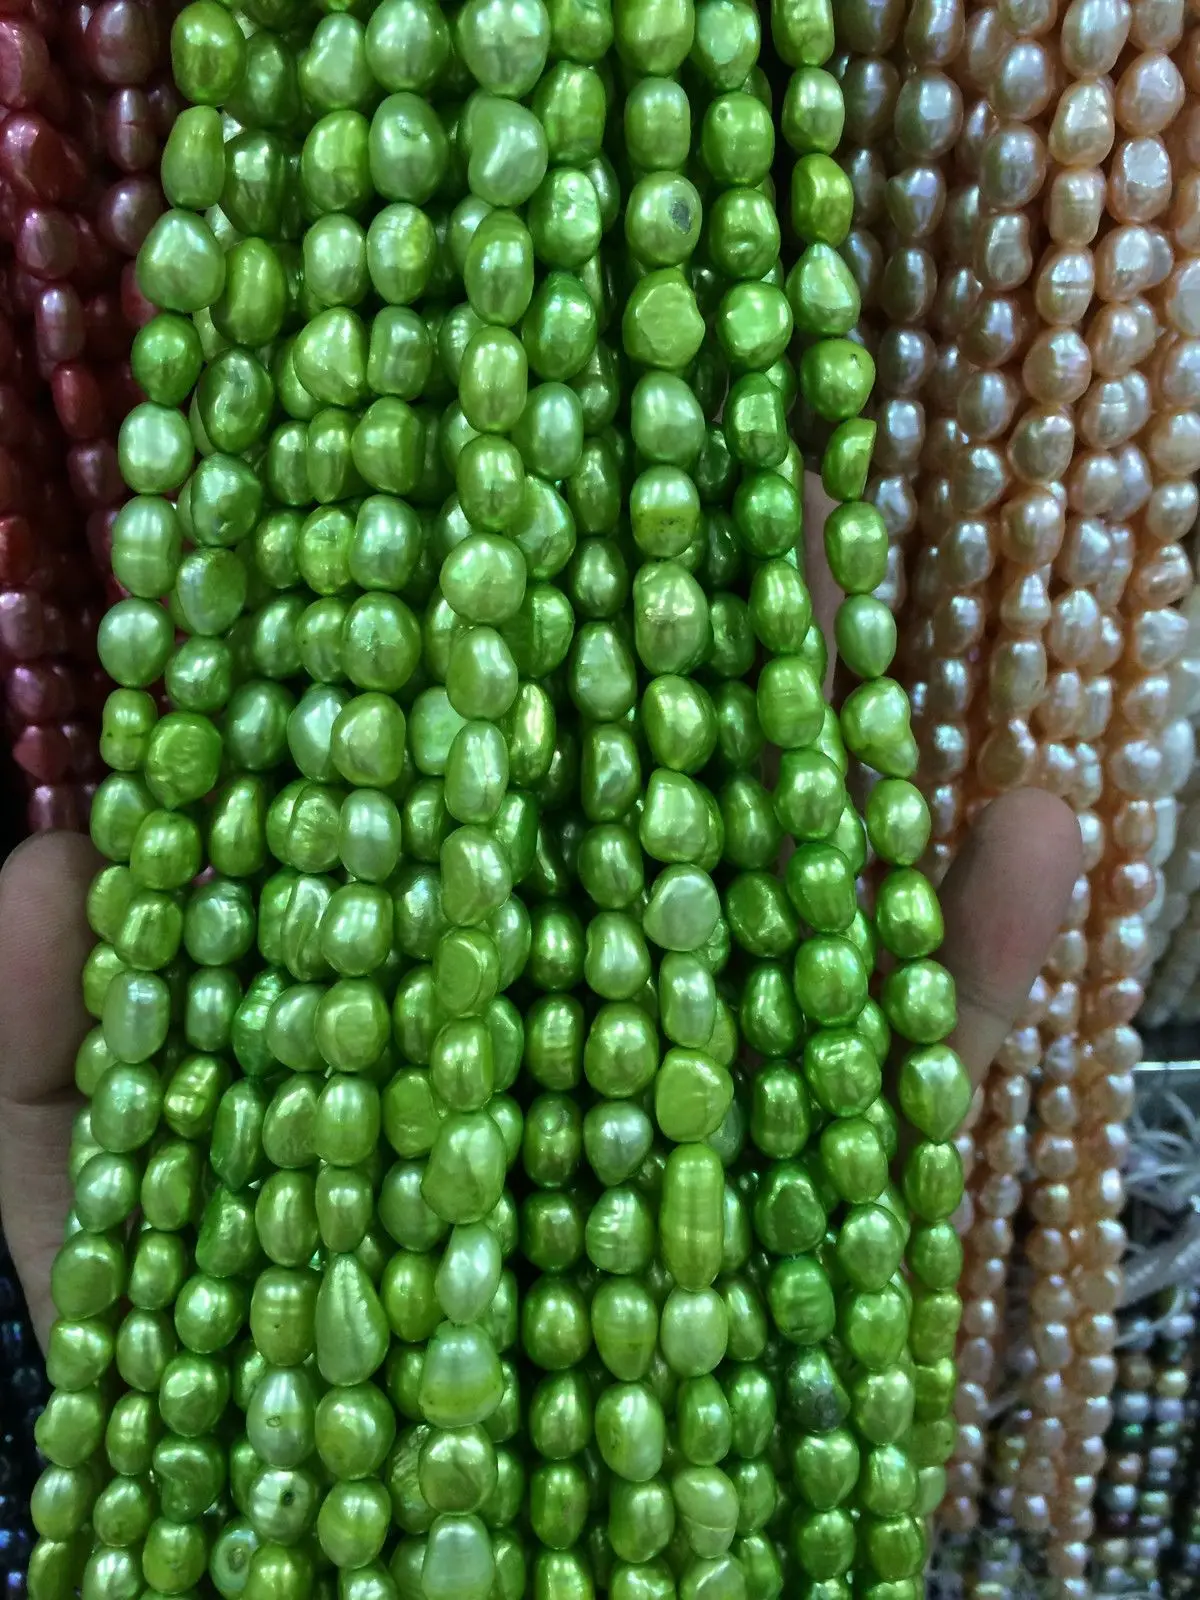 HABITOO Wholesale 8-9MM Green Irregular Freshwater Pearl Loose Beads 14 inchs DIY for Jewelry Making